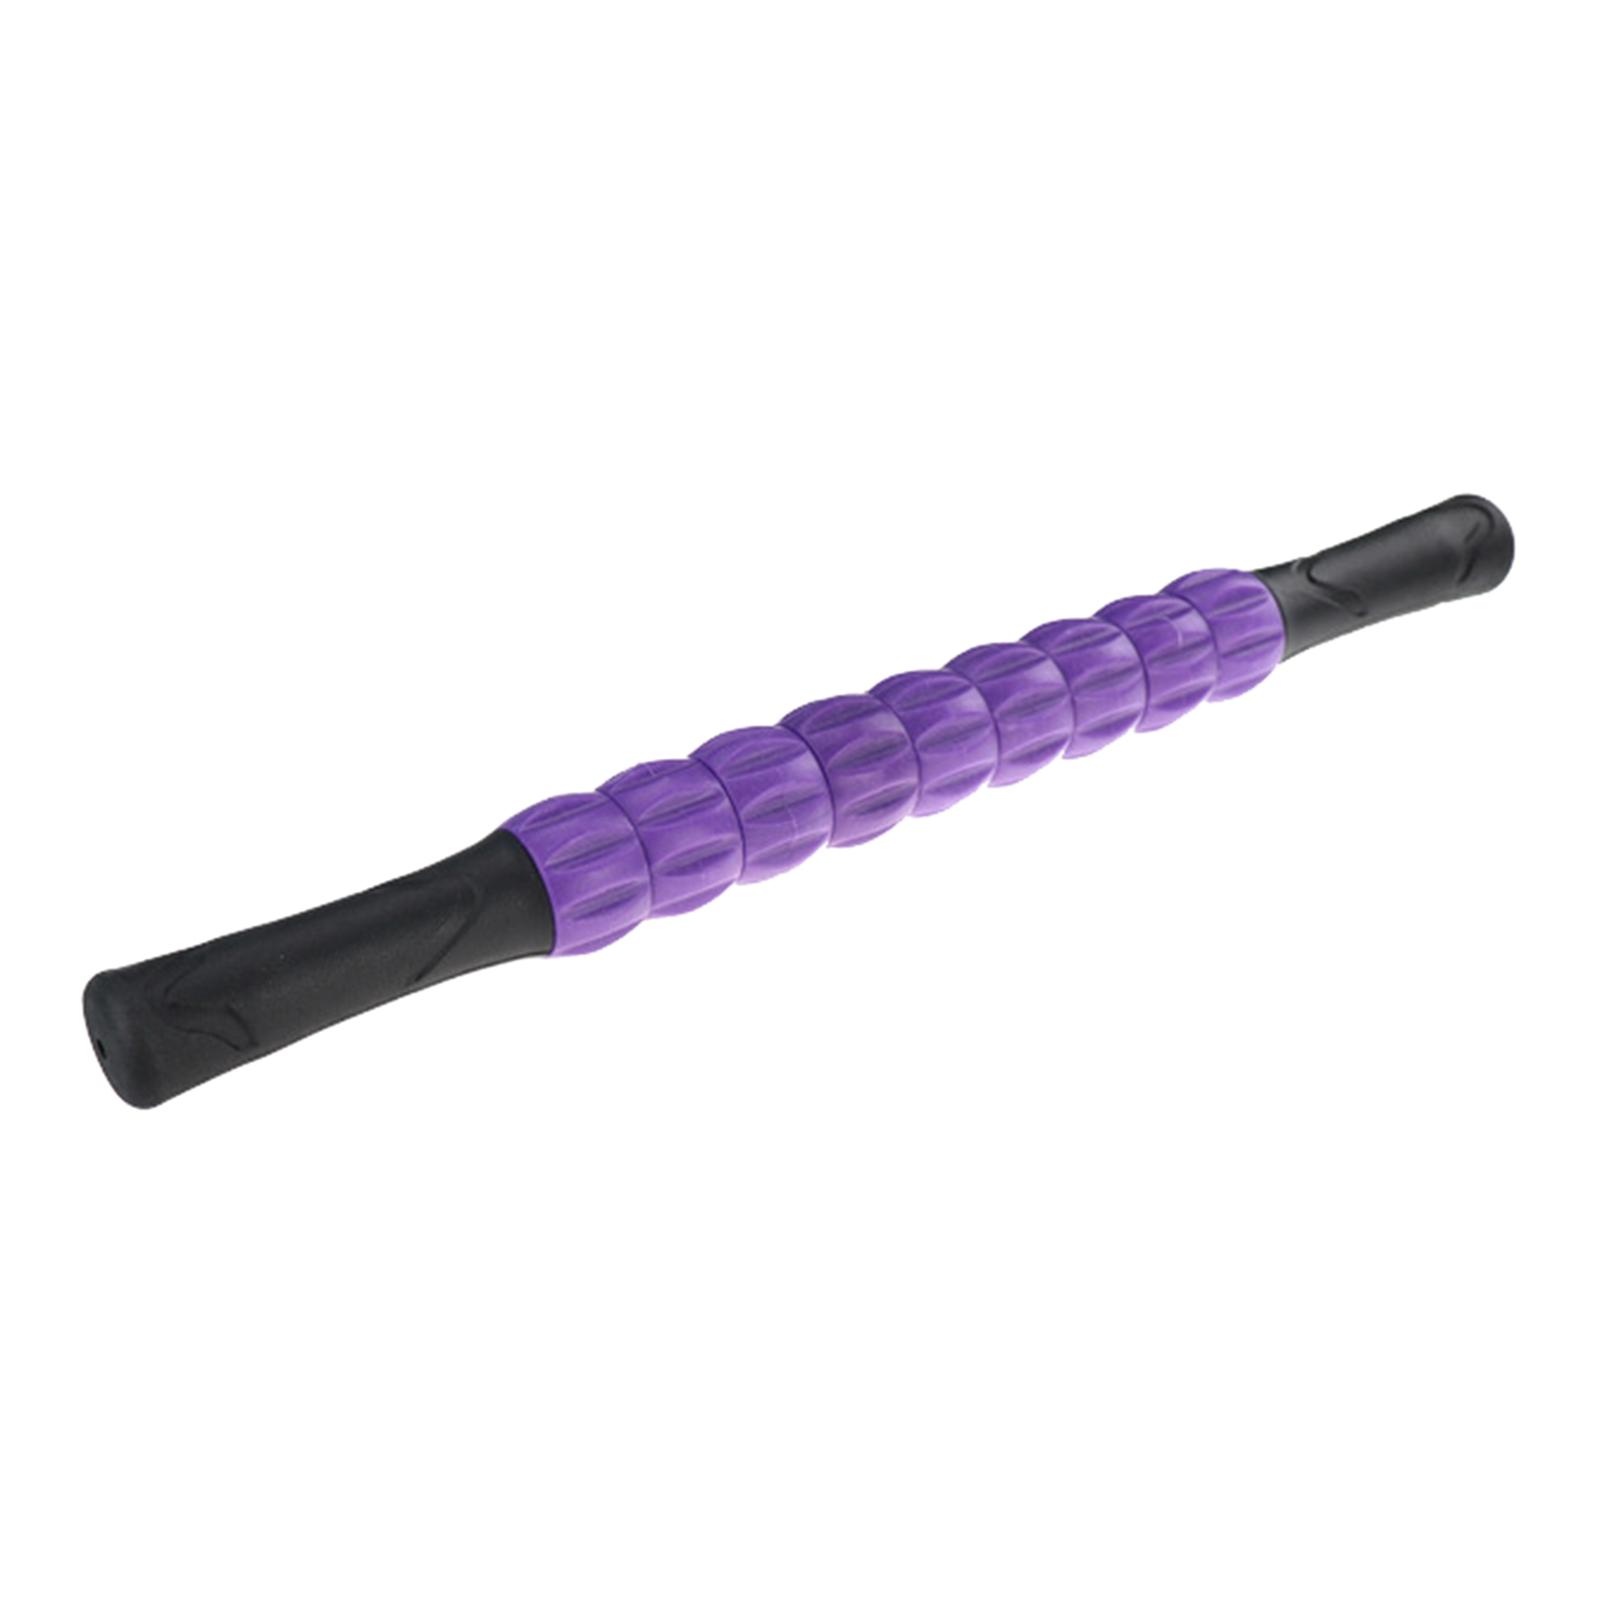 Portable Muscle Roller Stick for Athletes Full Body Massage Sticks Purple